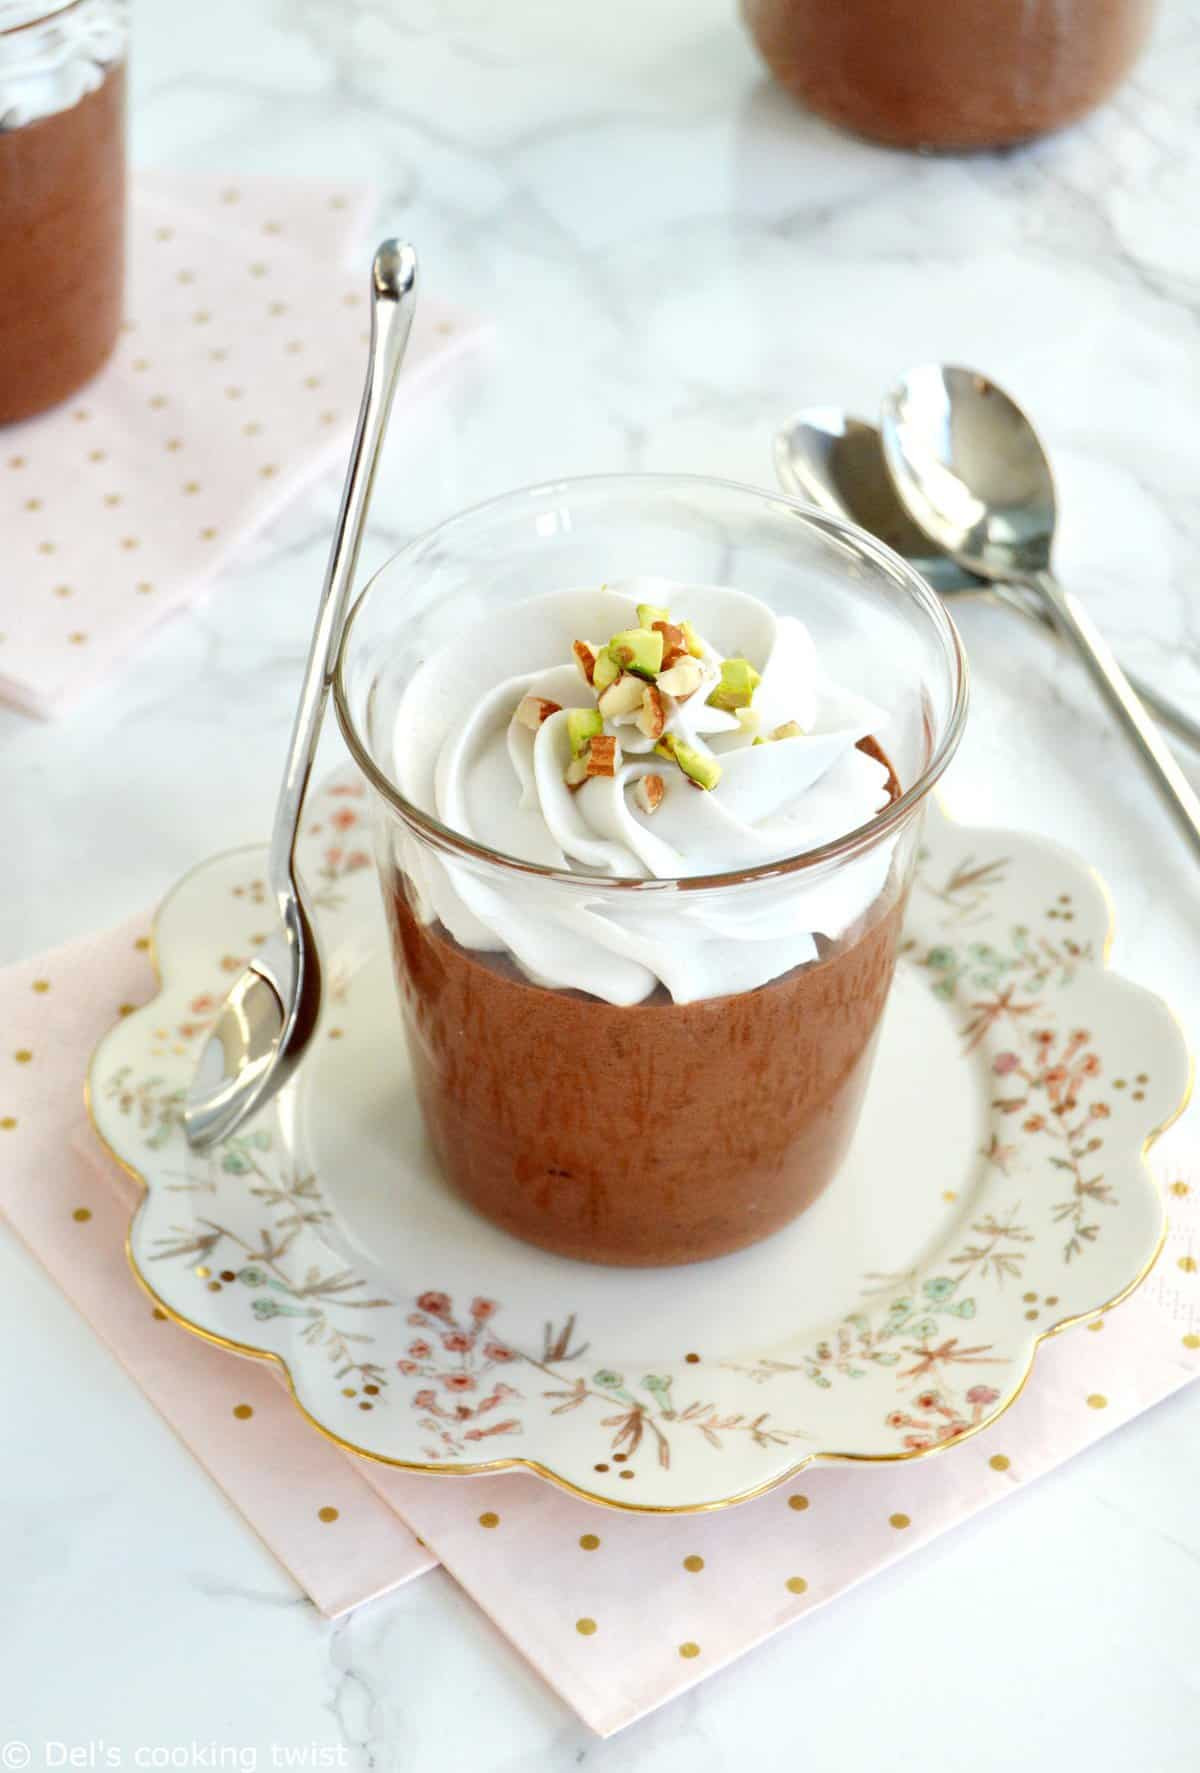 15 Recipes for Great Coconut Cream Chocolate Mousse